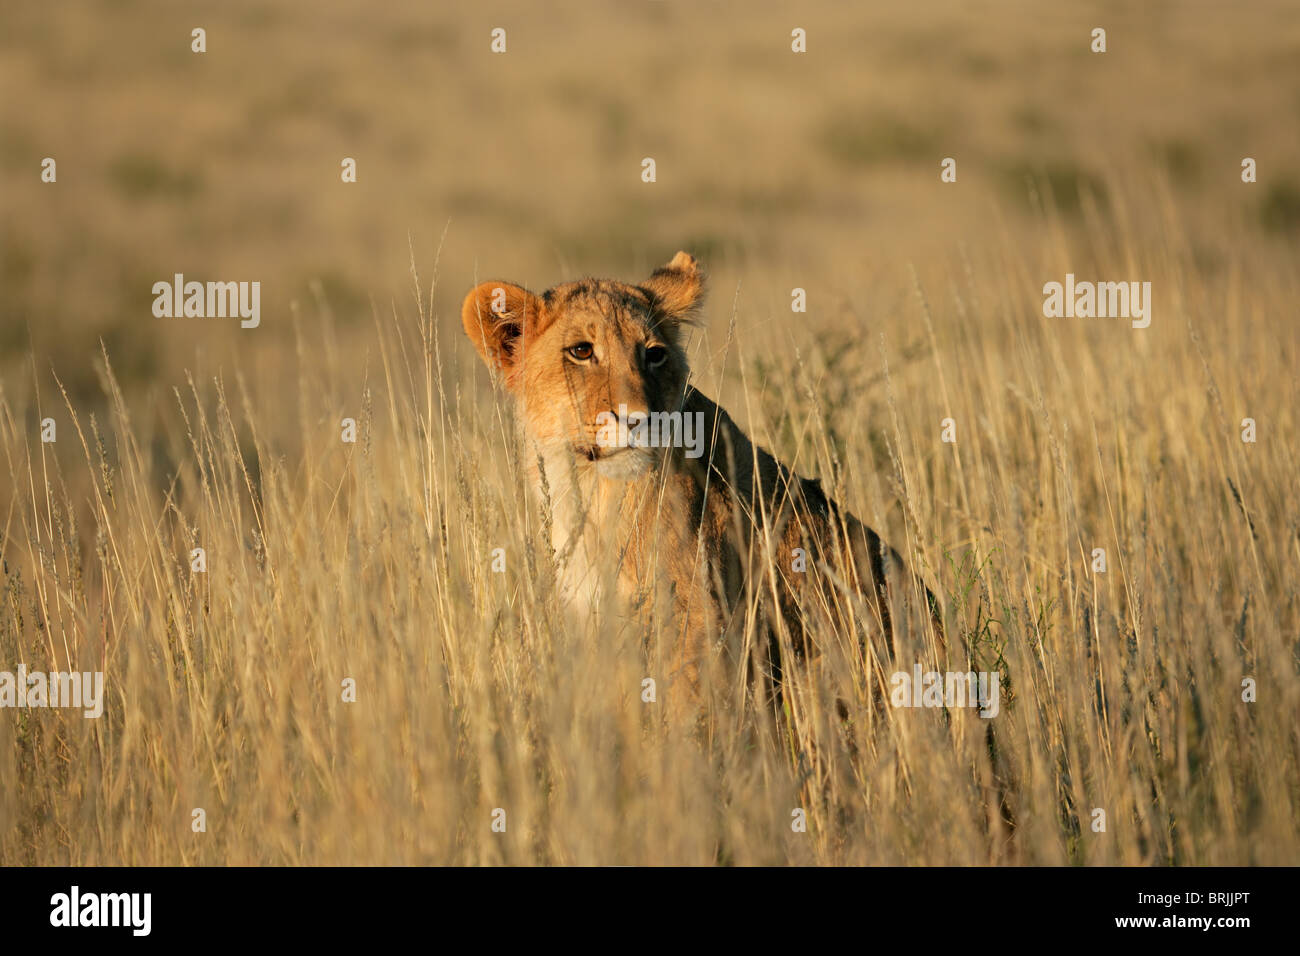 Young lion cub (Panthera leo) sitting among grasses, Kgalagadi Transfrontier Park, South Africa Stock Photo